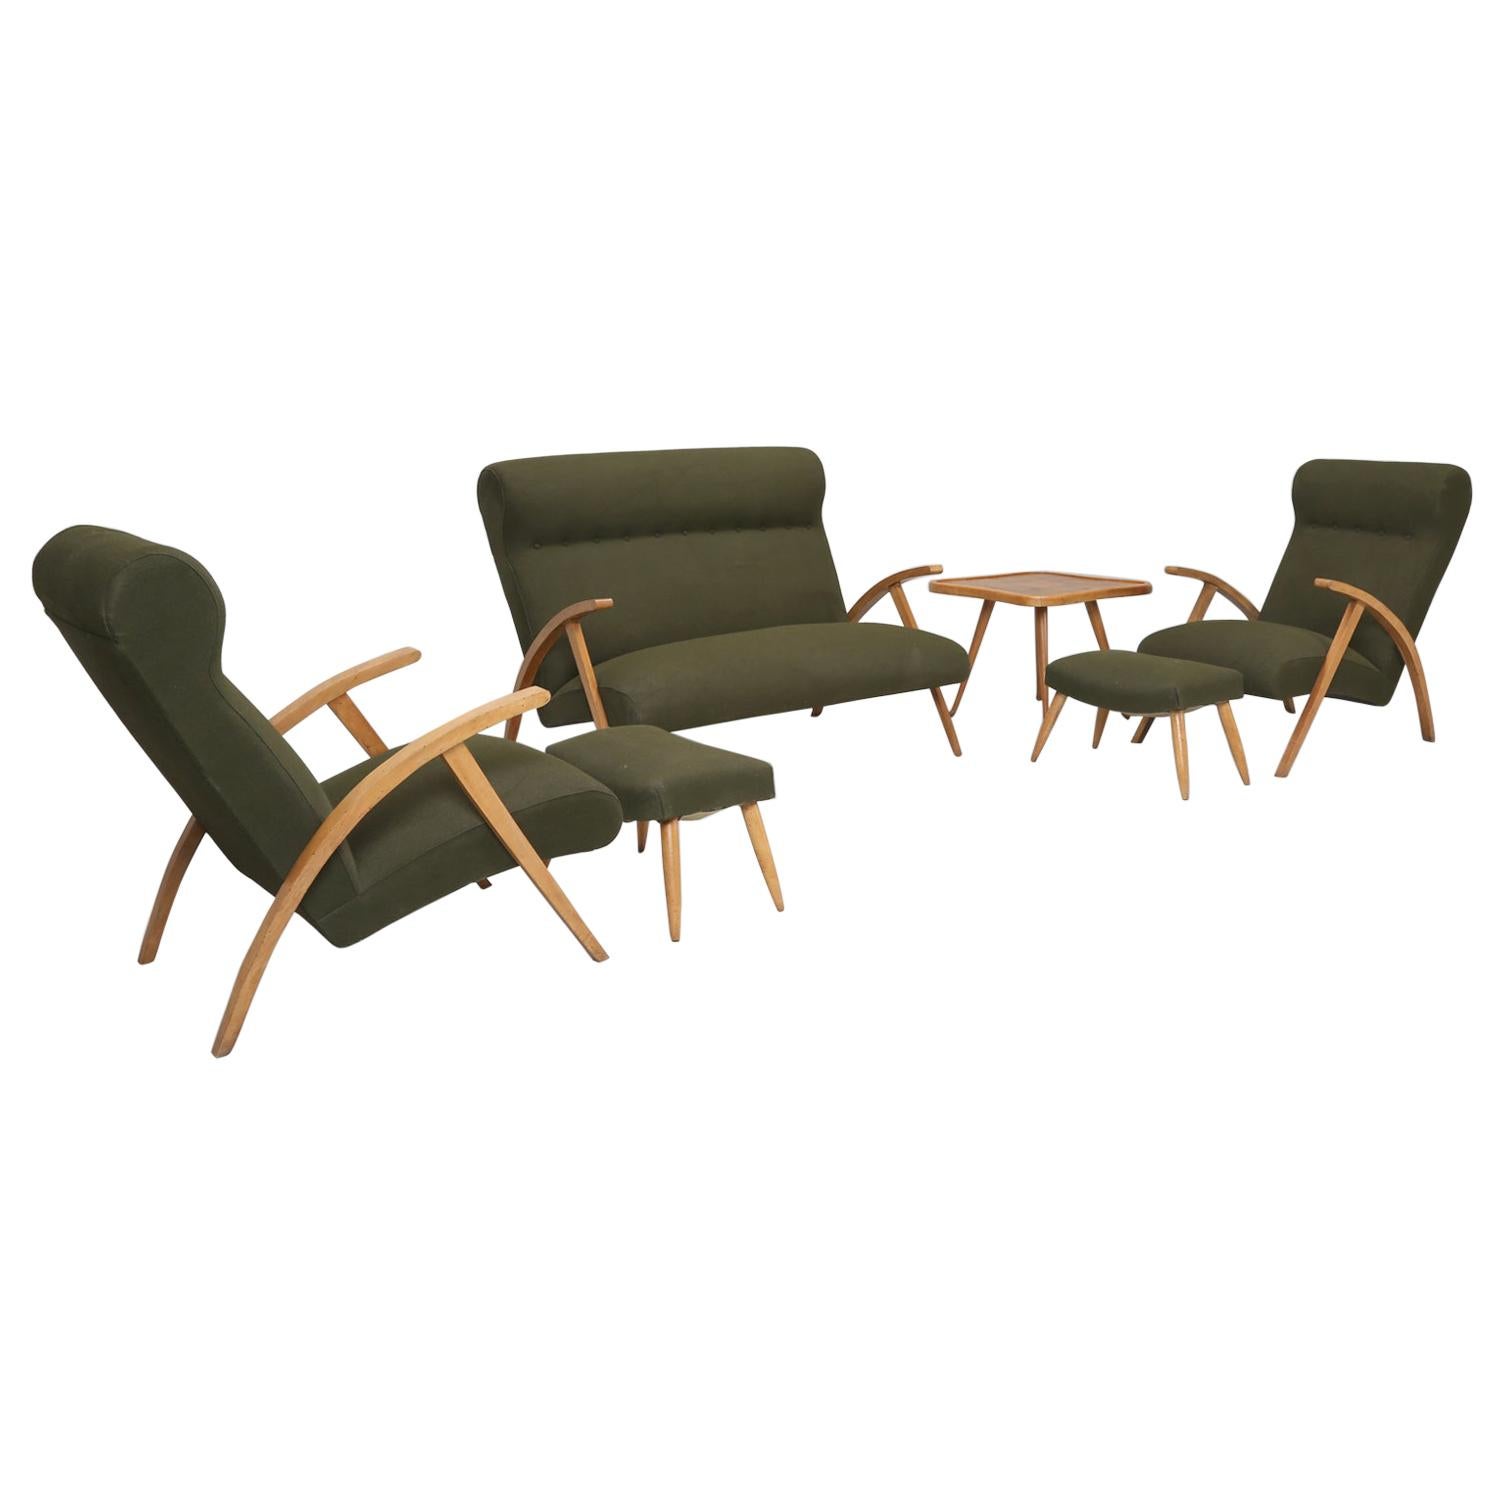 Italian Mid-Century Modern Complete Suite Chairs with Ottomans, Settee and Table